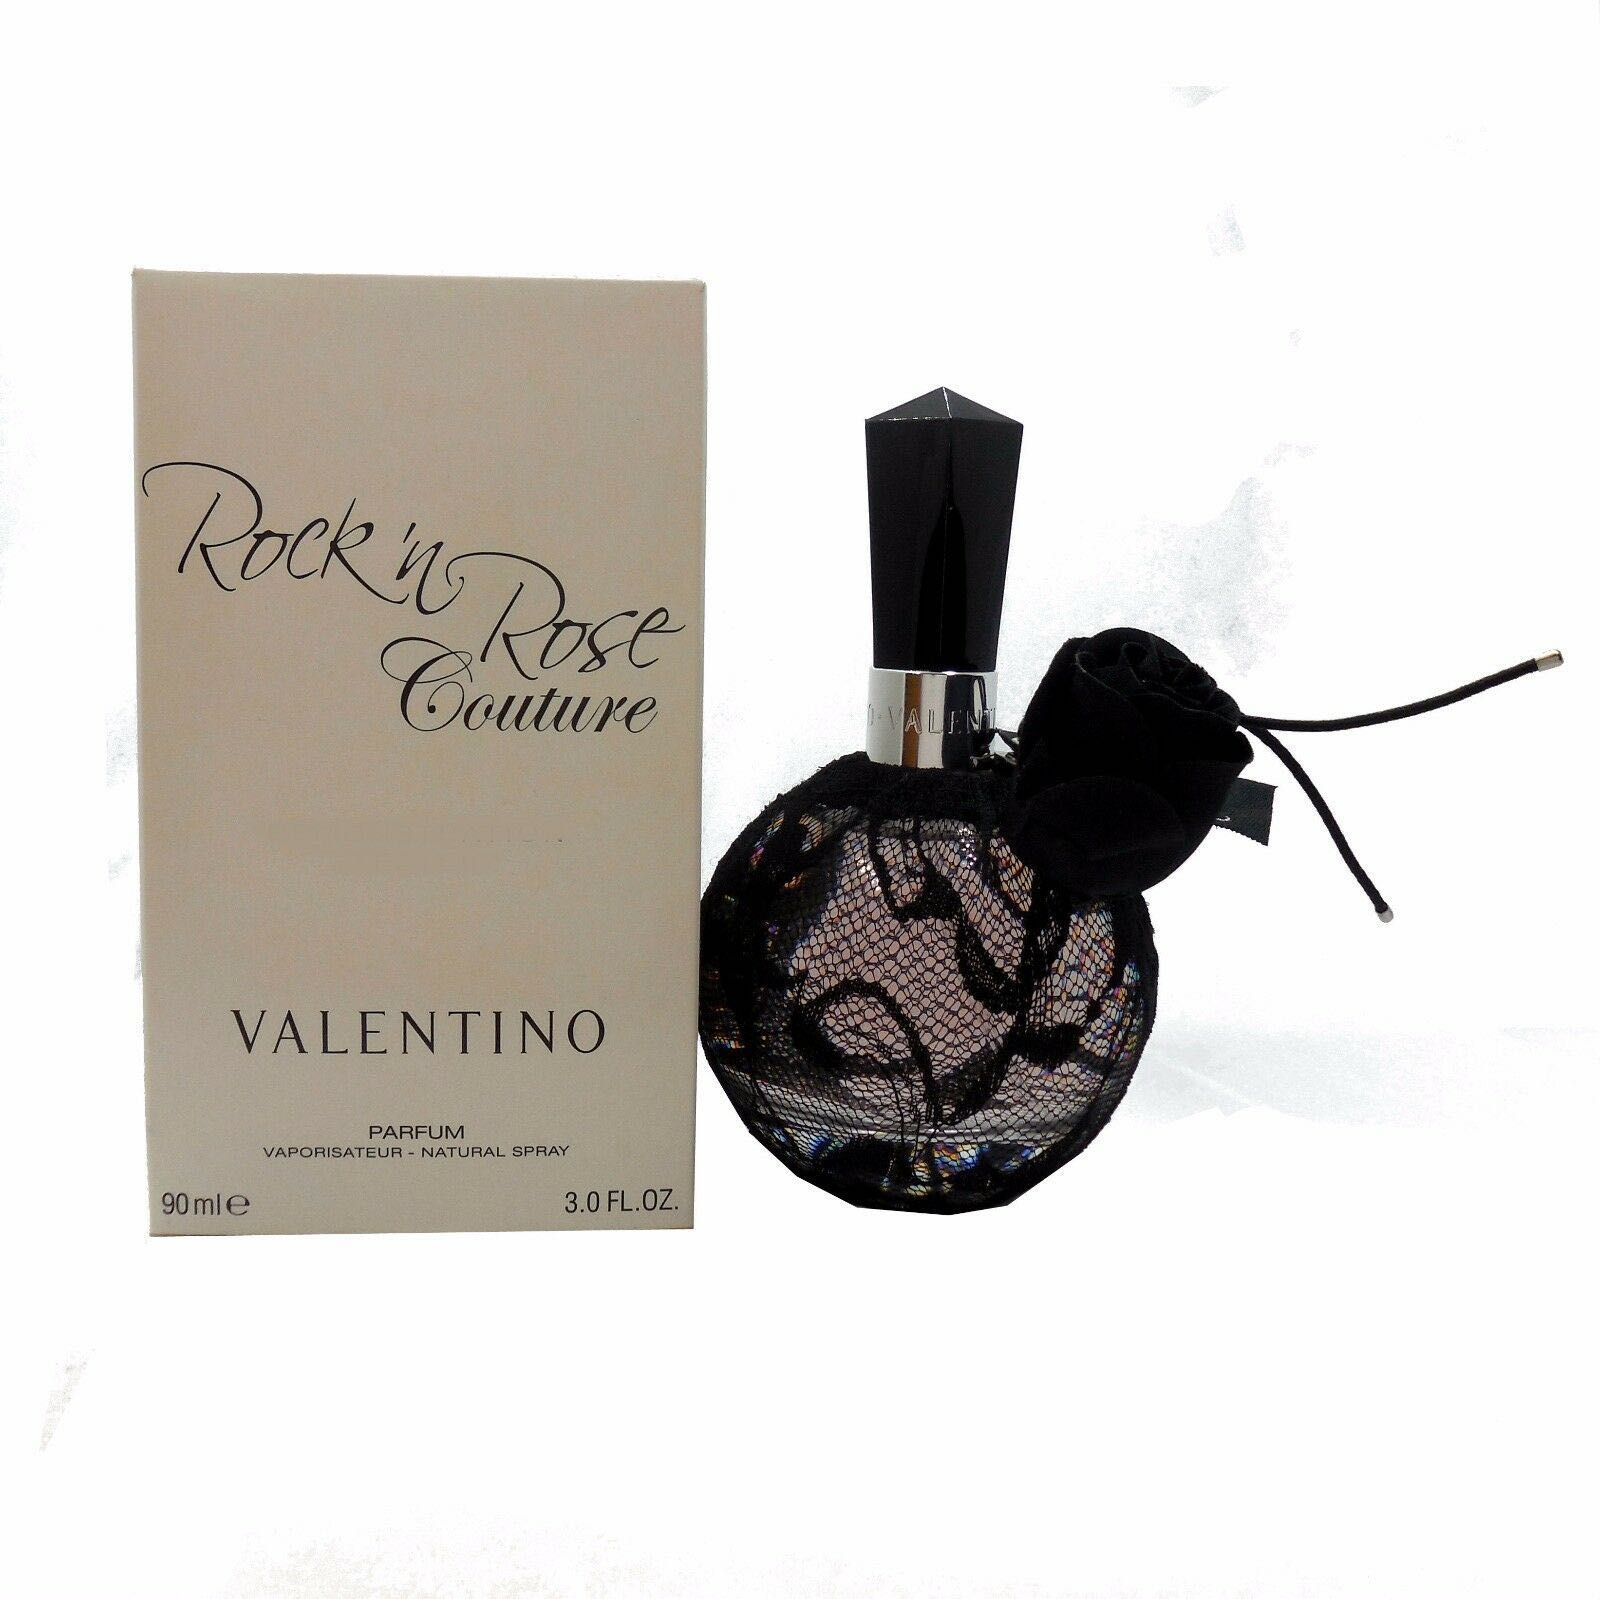 Valentino rock and roses couture parfum 50 ml